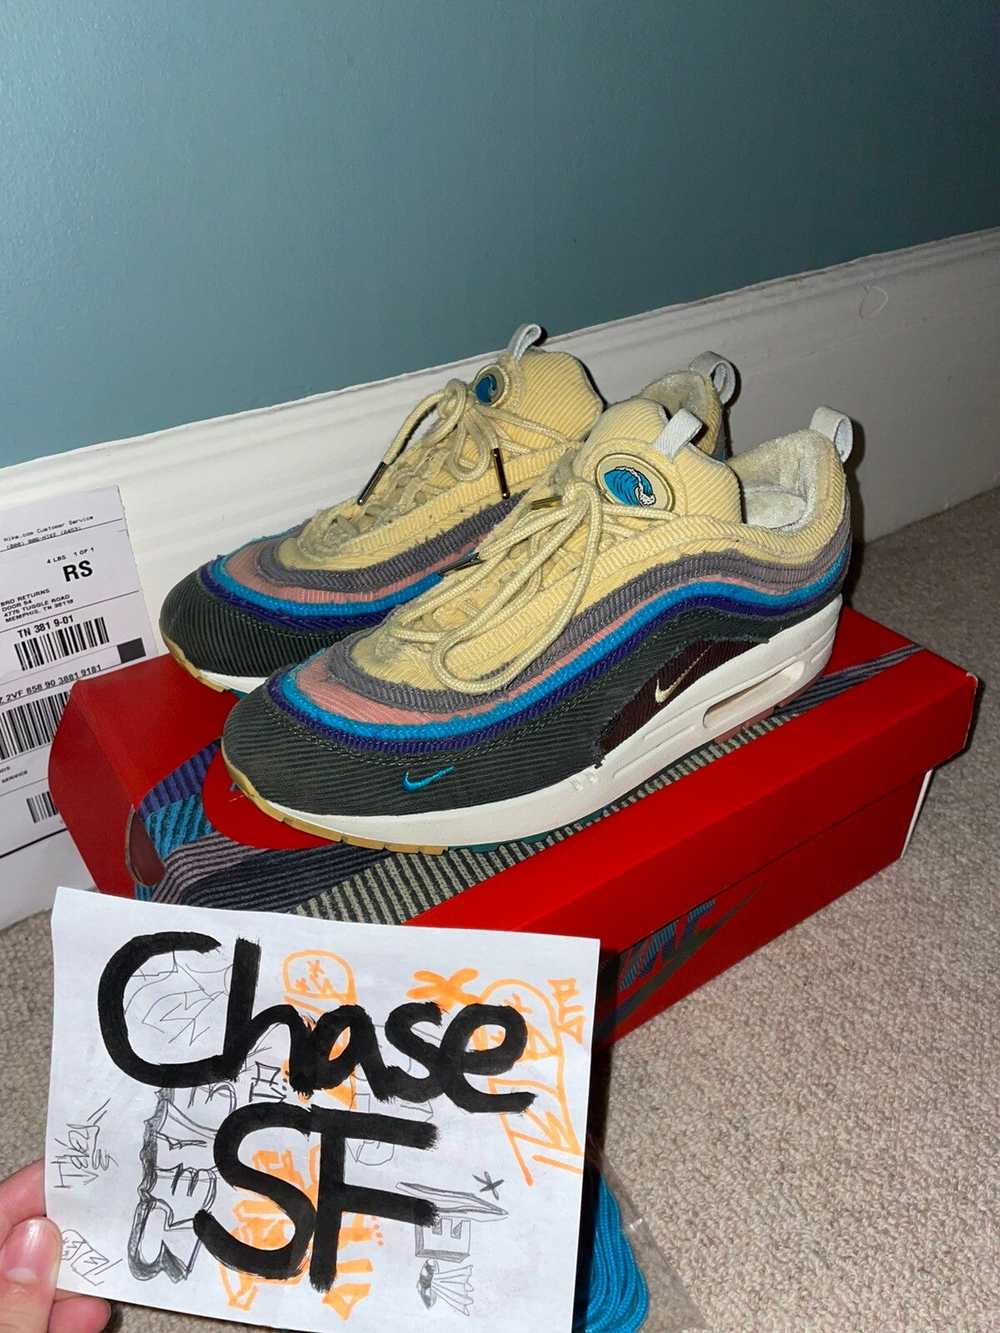 Nike Sean Witherspoon Airmax 1/97 - image 4